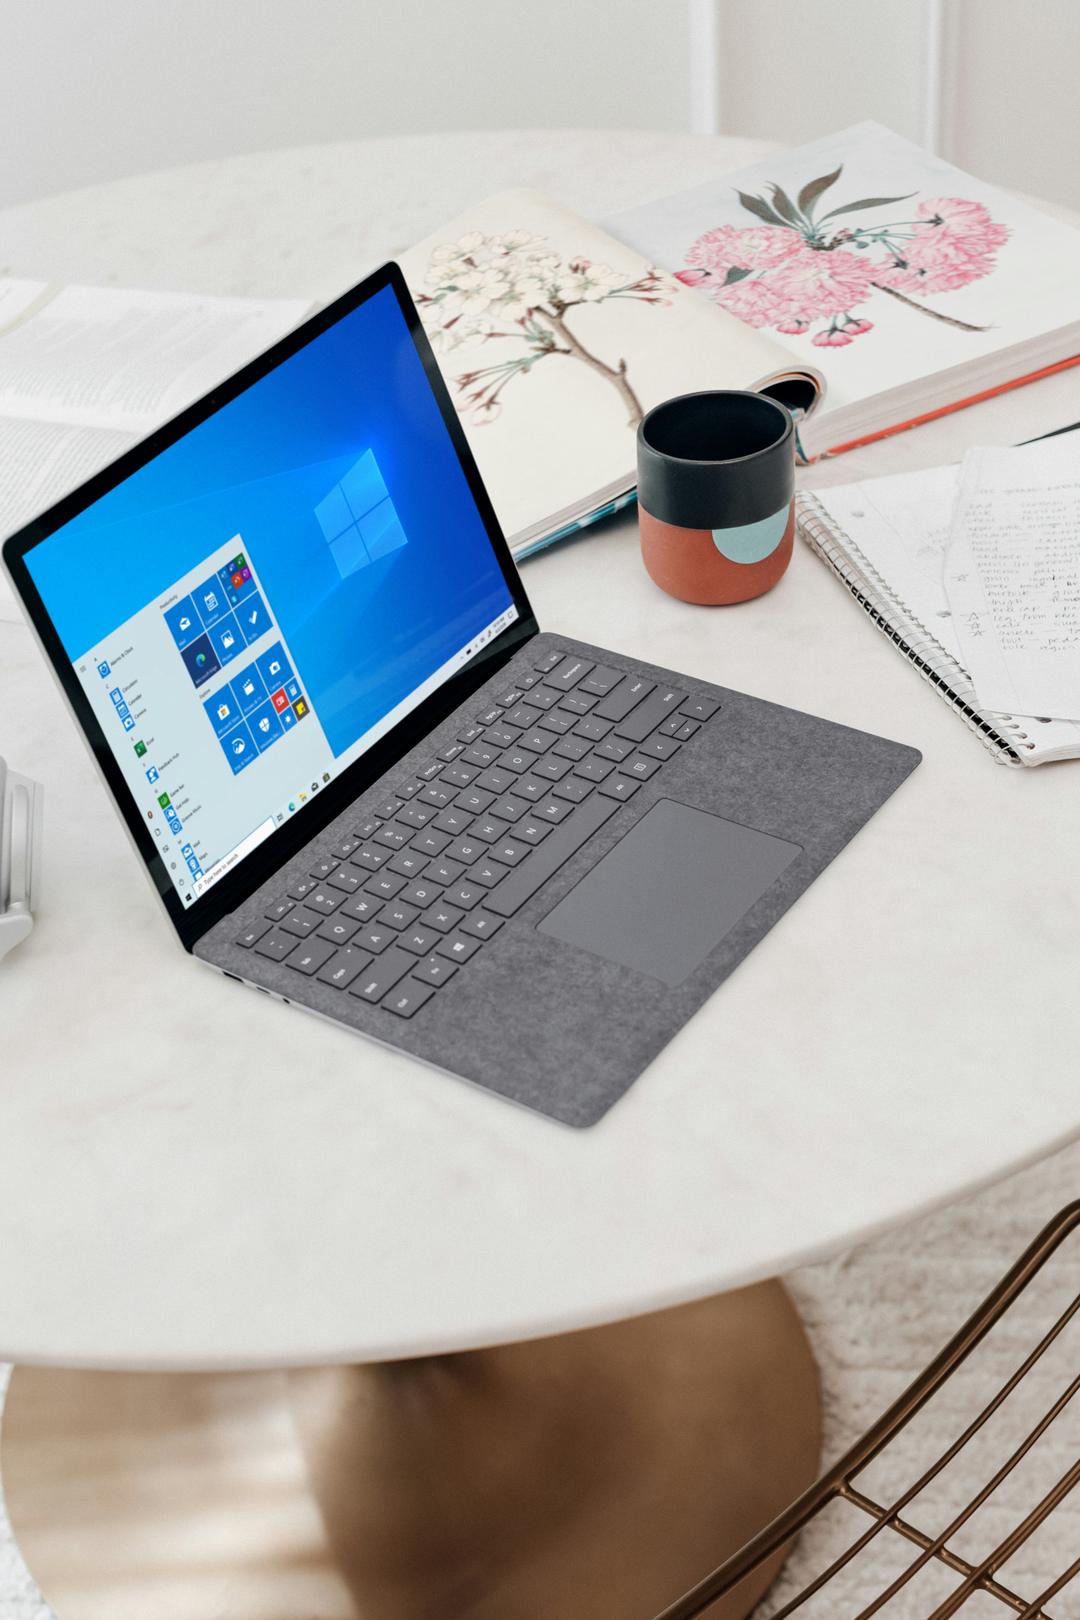 The Microsoft Surface Laptop 4 is a sleek and lightweight laptop that is perfect for on-the-go use. It features a 13.5-inch or 15-inch PixelSense touchscreen display, 11th Gen Intel Core i5 or i7 processor, up to 32GB of RAM, and up to 1TB of storage. The Surface Laptop 4 also has a long battery life of up to 19 hours, making it a great choice for work or play.